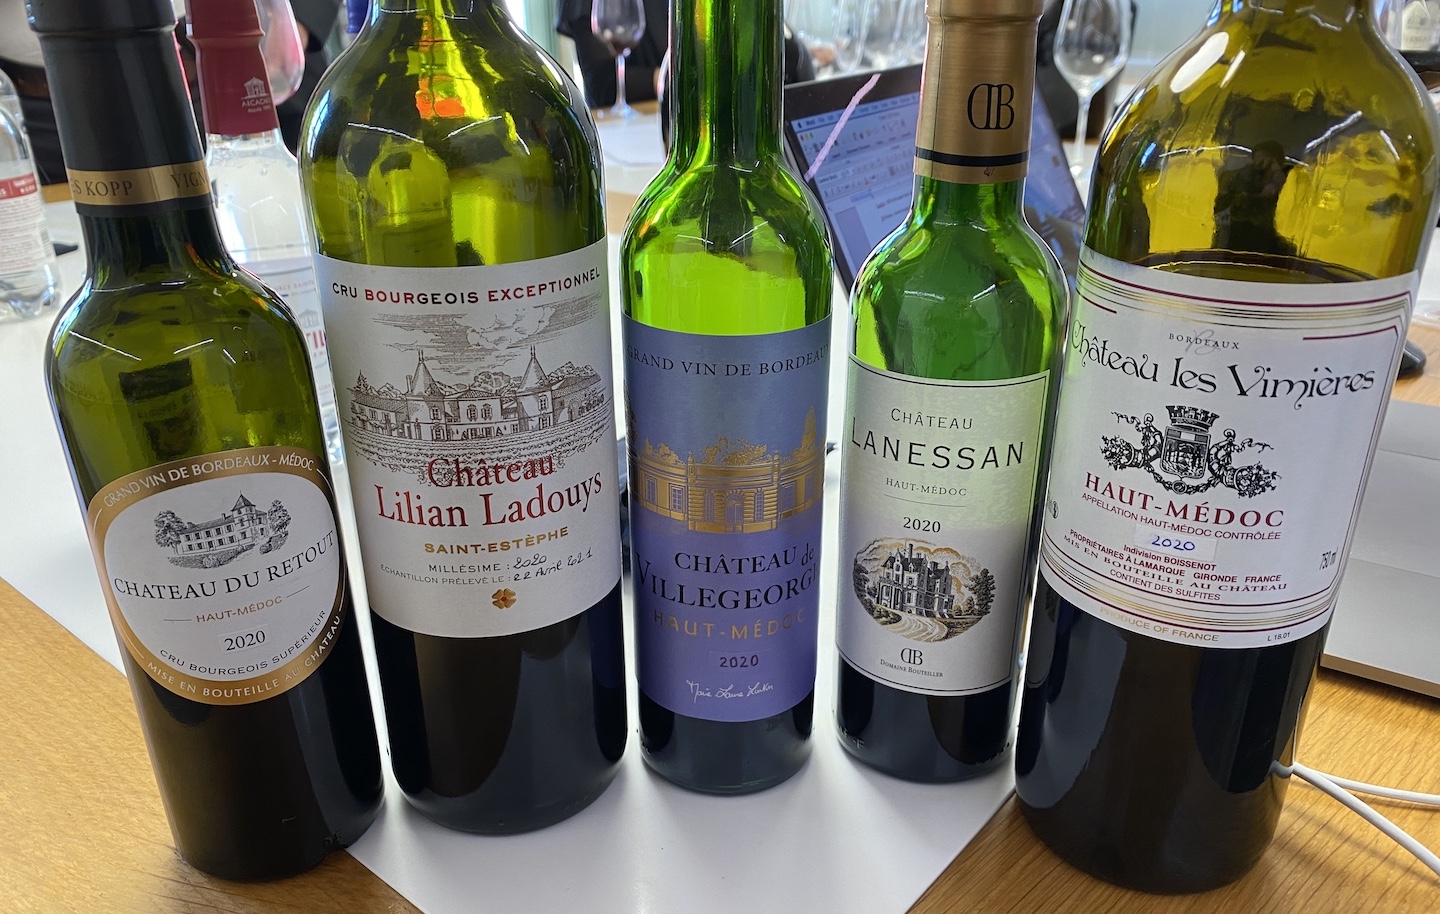 Top 50+ 2020 | hits: Wine barrel Bordeaux from Chronicles